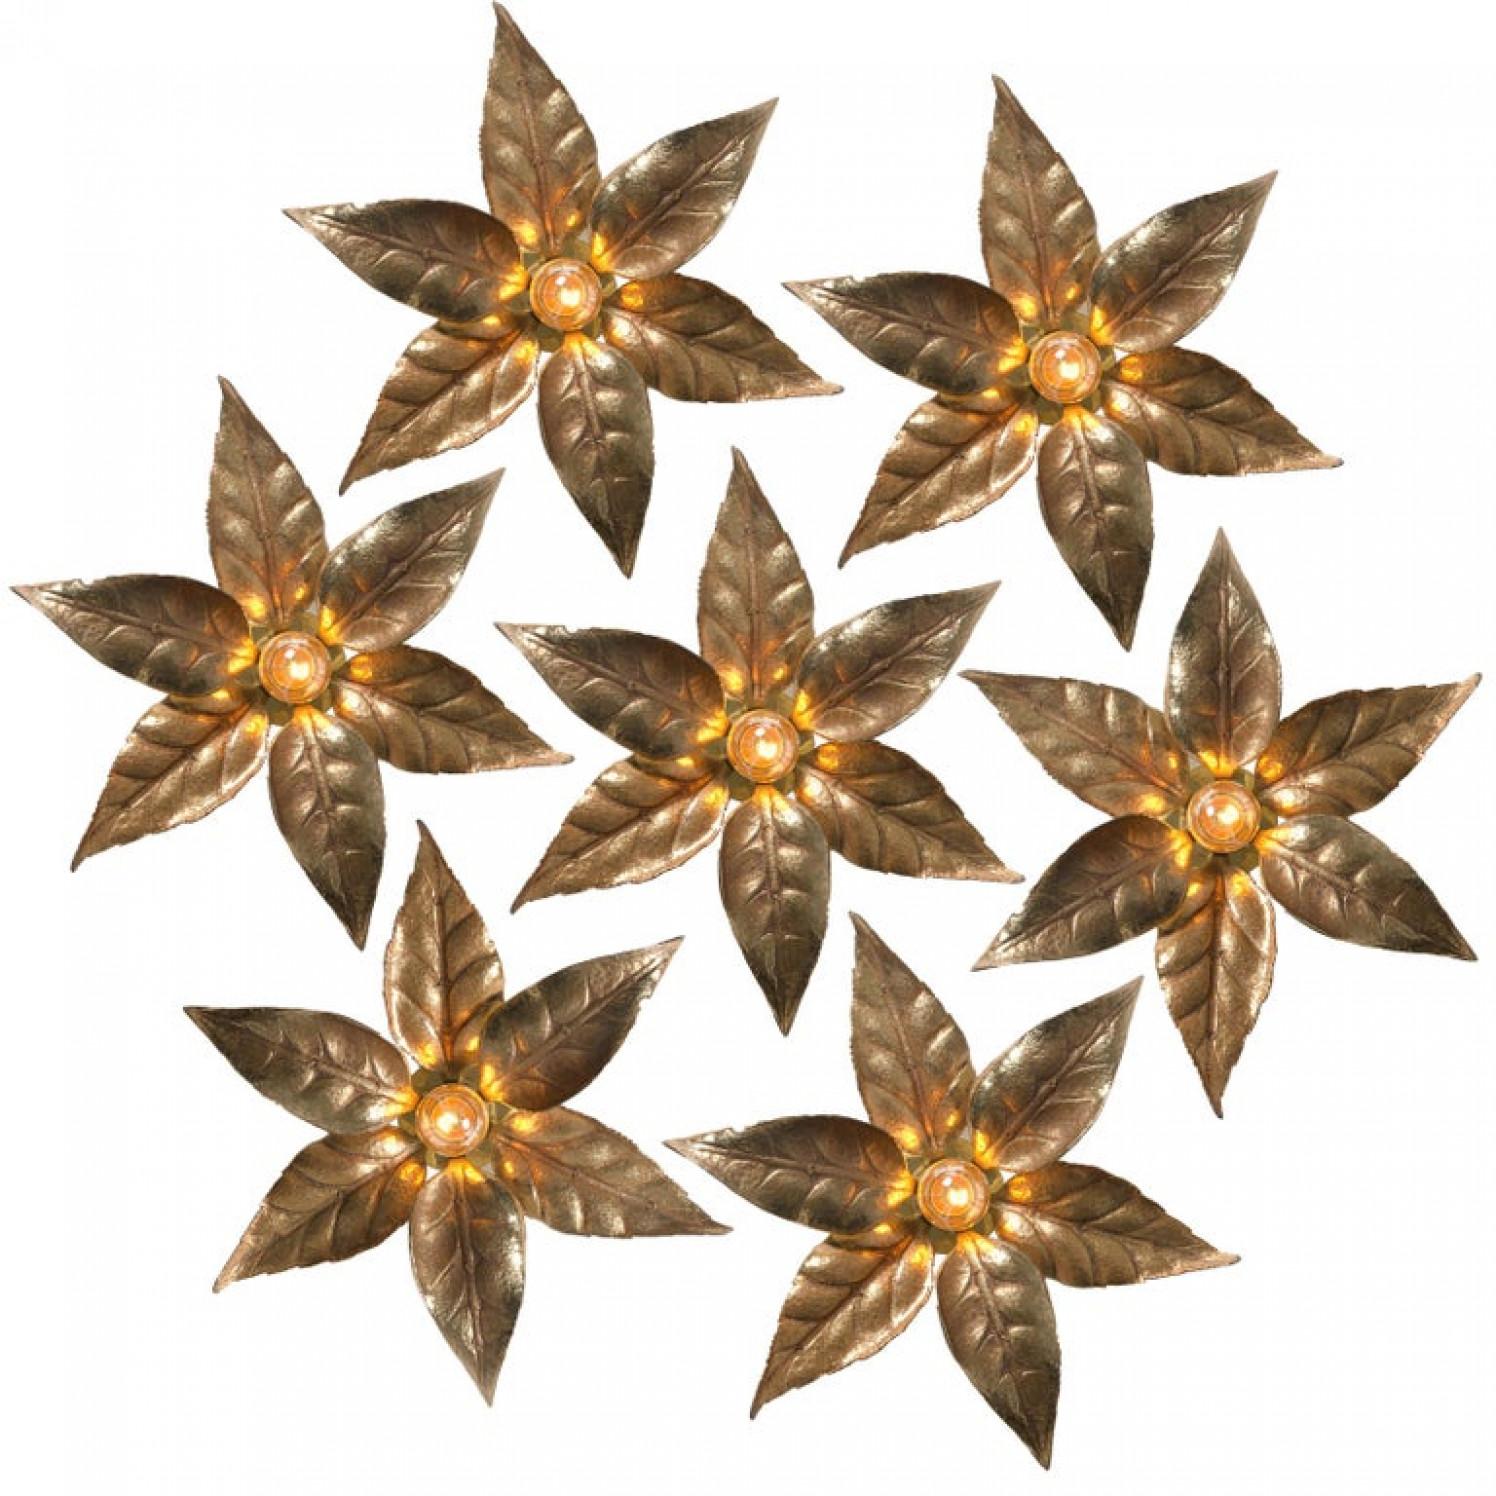 1 of 6 very nice massive flower wall lights, made in Belgium in the 1970s. In a style reminiscent of designs by Willy Daro. These lights are made of brass and look like a life-size big flower, very nice sculpted in brass.

The golden brass reflects